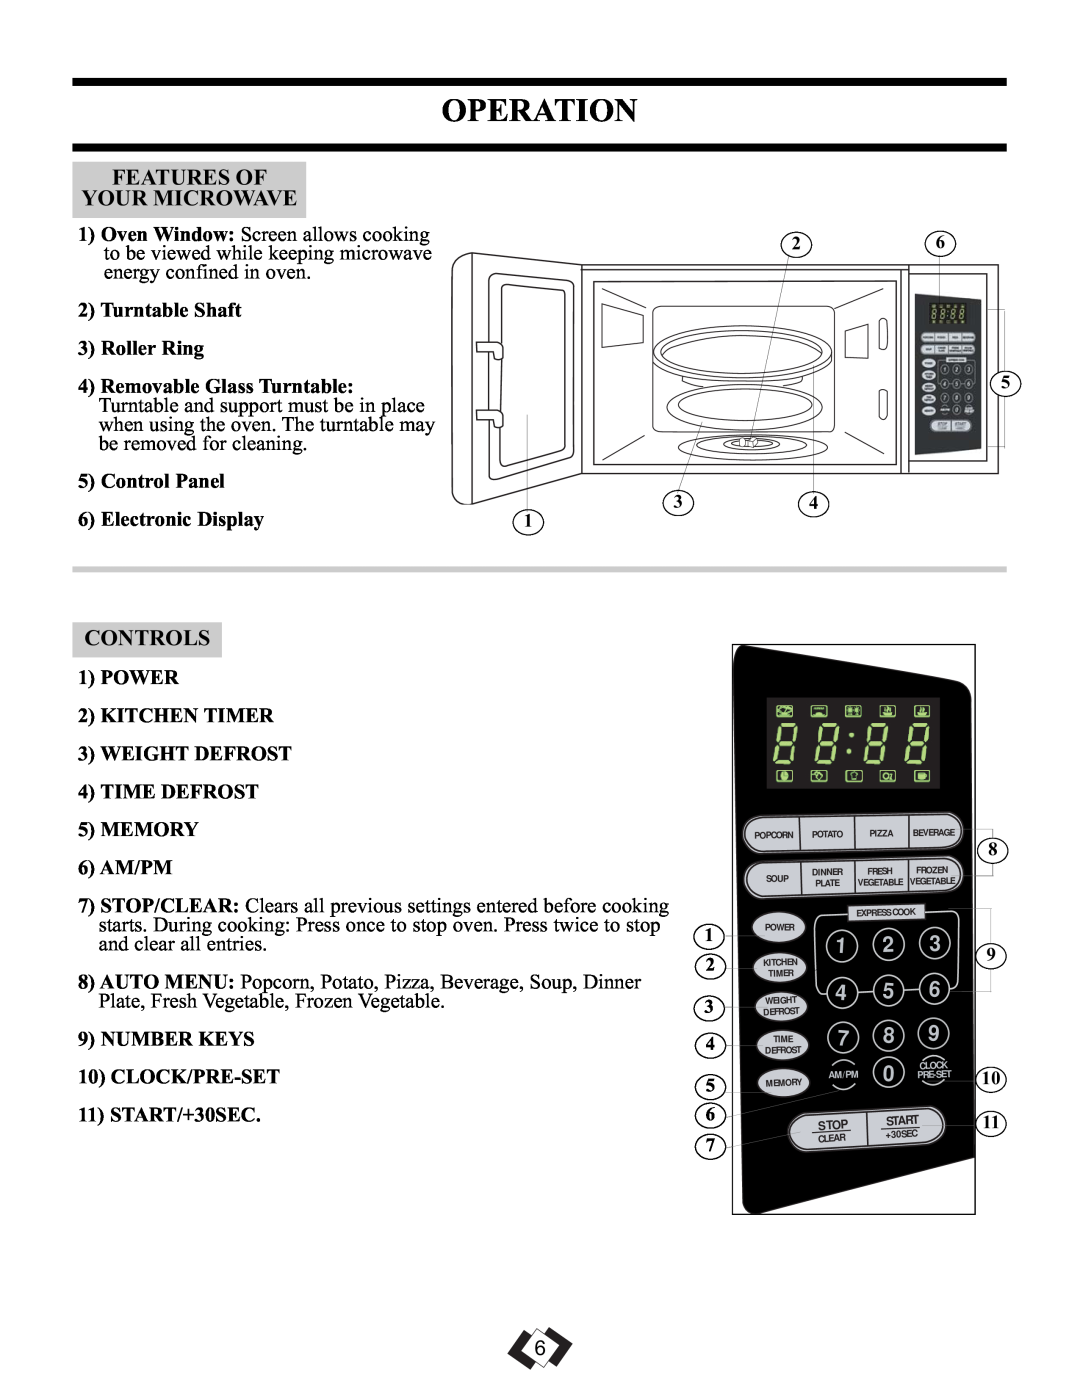 Danby DMW099BLSDD operating instructions Operation, Features Of Your Microwave, Controls 